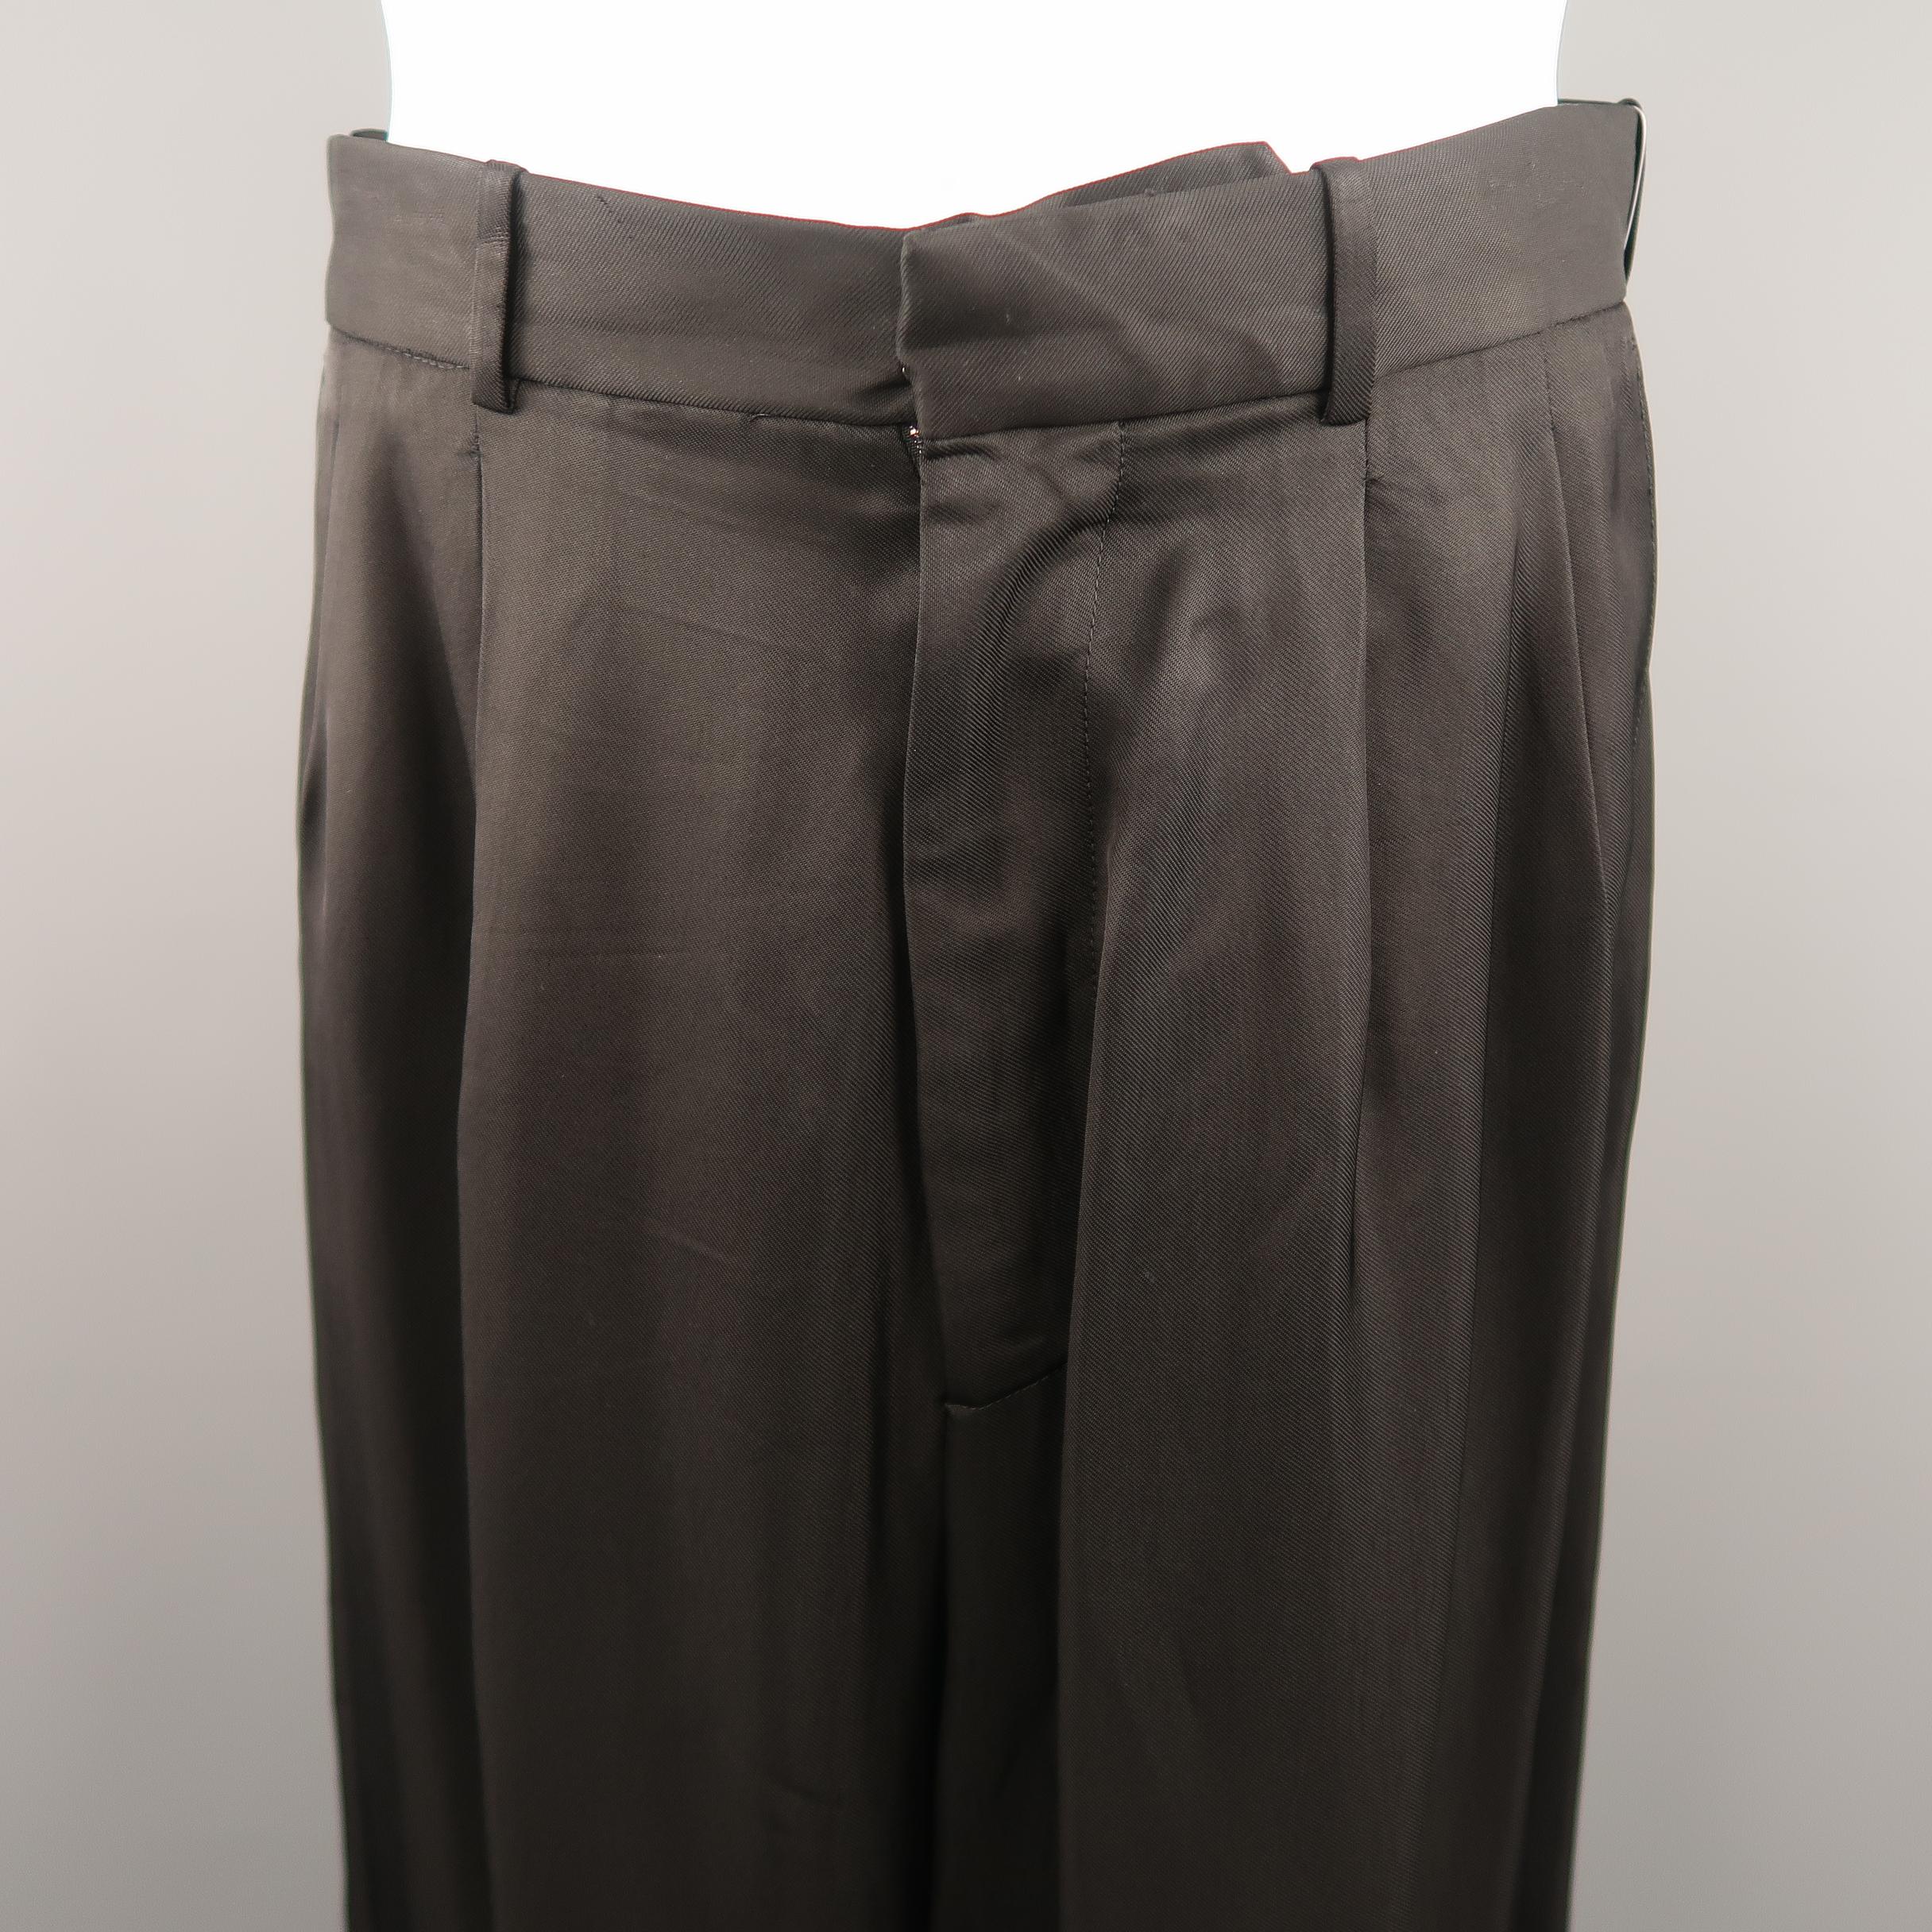 ALEXANDER MCQUEEN Cropped Casual Pants comes in a black tone in a solid rayon material, with a pleated front, seam and flap pockets, side adjusters at legs, zip fly. Made in Italy.
 
Excellent Pre-Owned Condition.
Marked: IT 46
 
Measurements:
